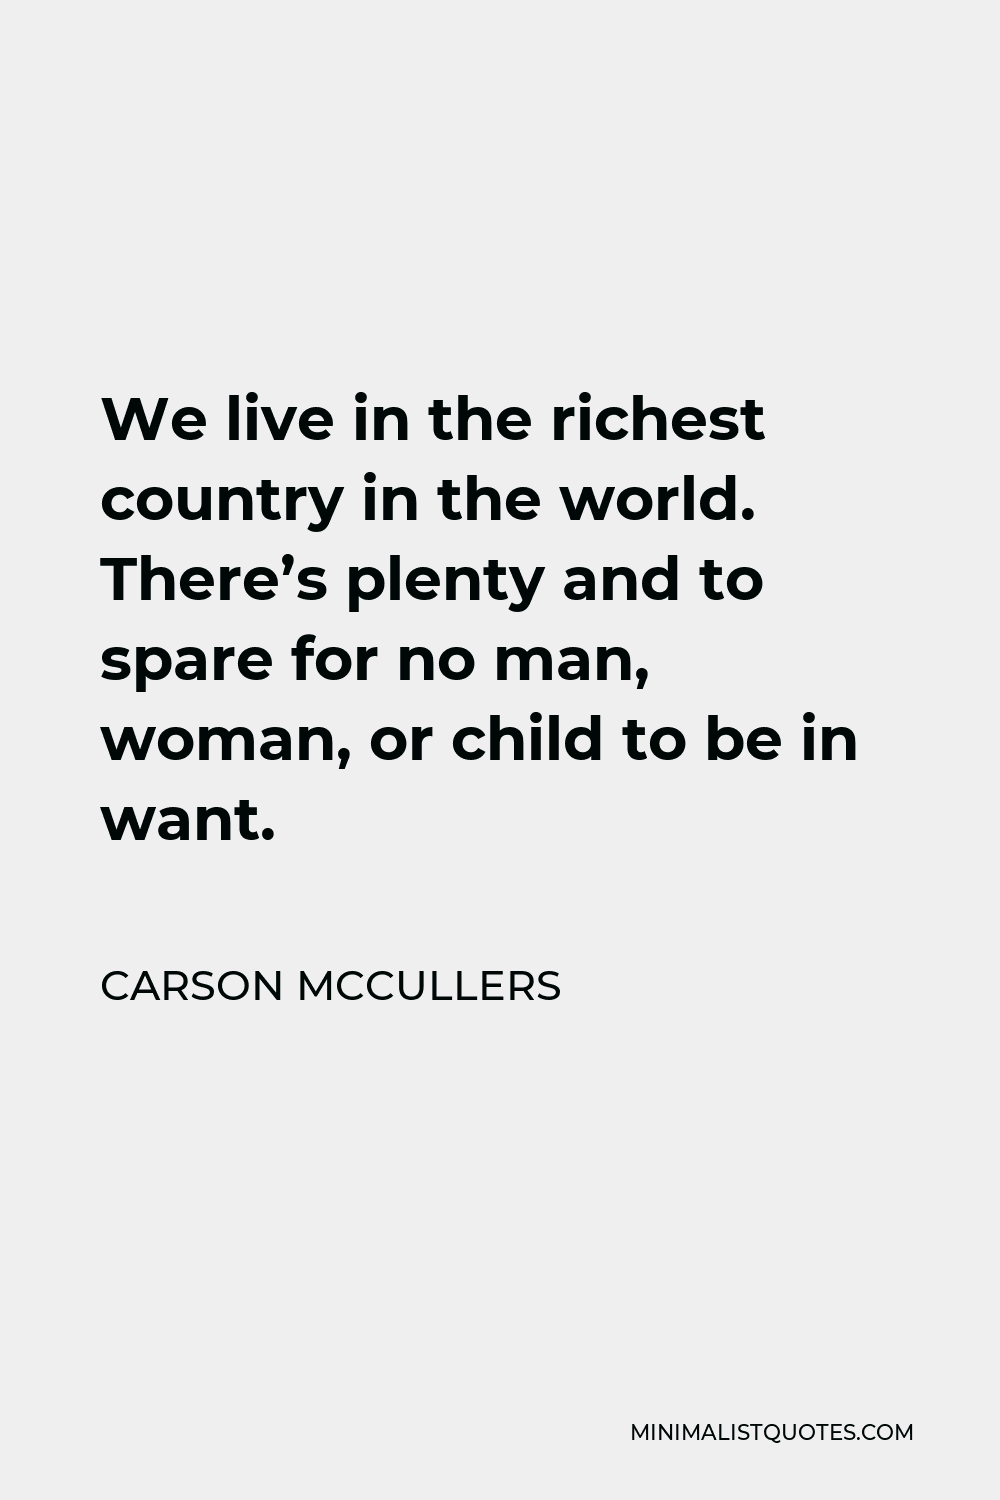 Carson McCullers Quote - We live in the richest country in the world. There’s plenty and to spare for no man, woman, or child to be in want.